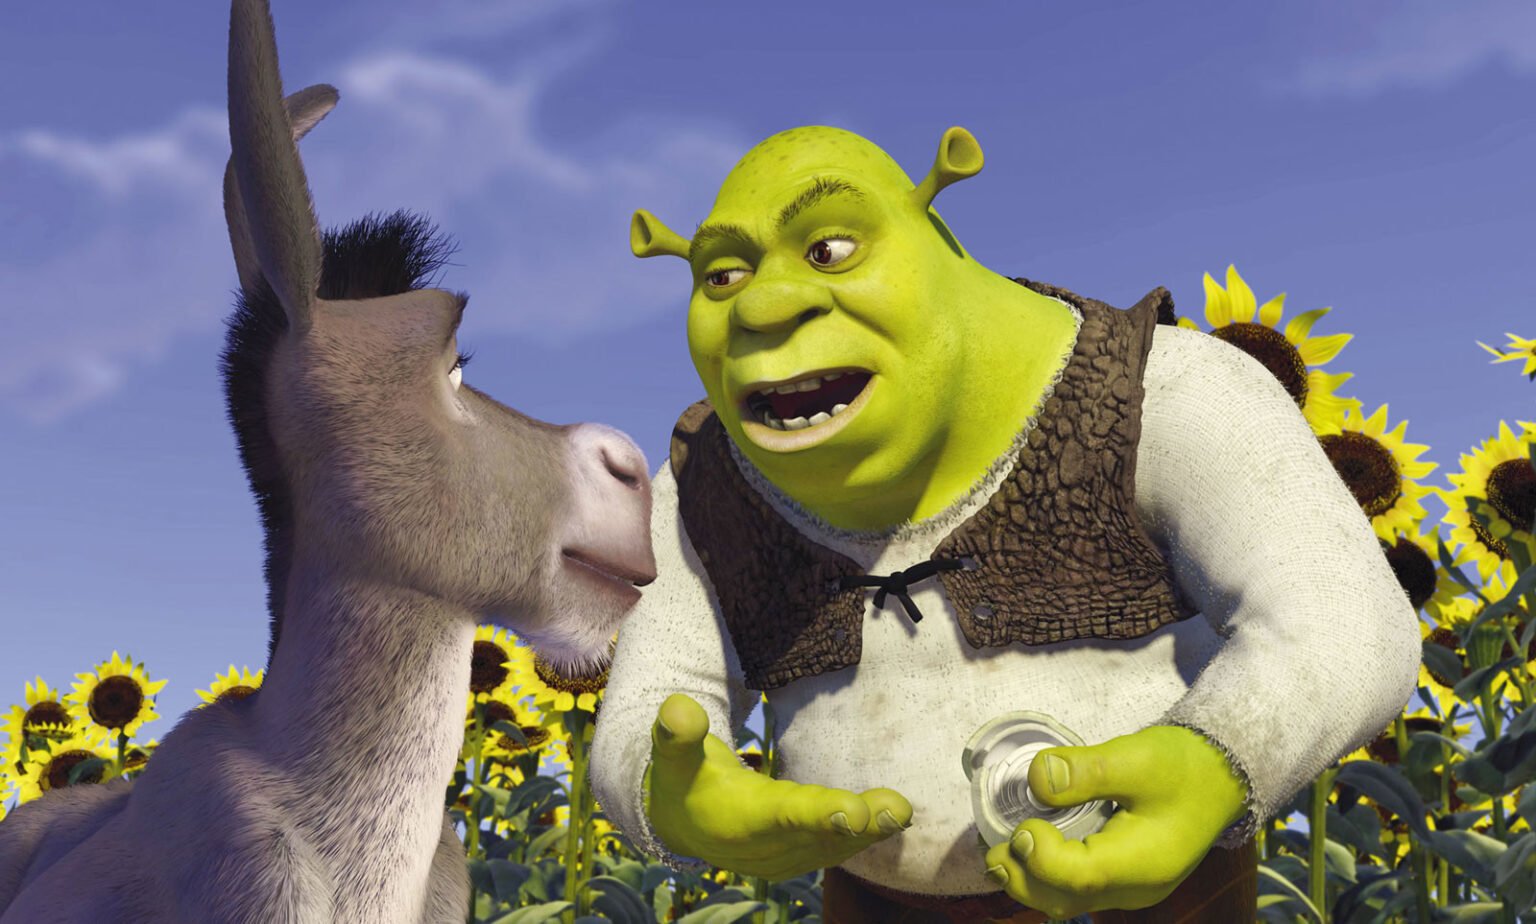 Can you believe it's been twenty years since 'Shrek' roared into theaters? Take a behind-the-scenes look at this monster movie to celebrate it with us.